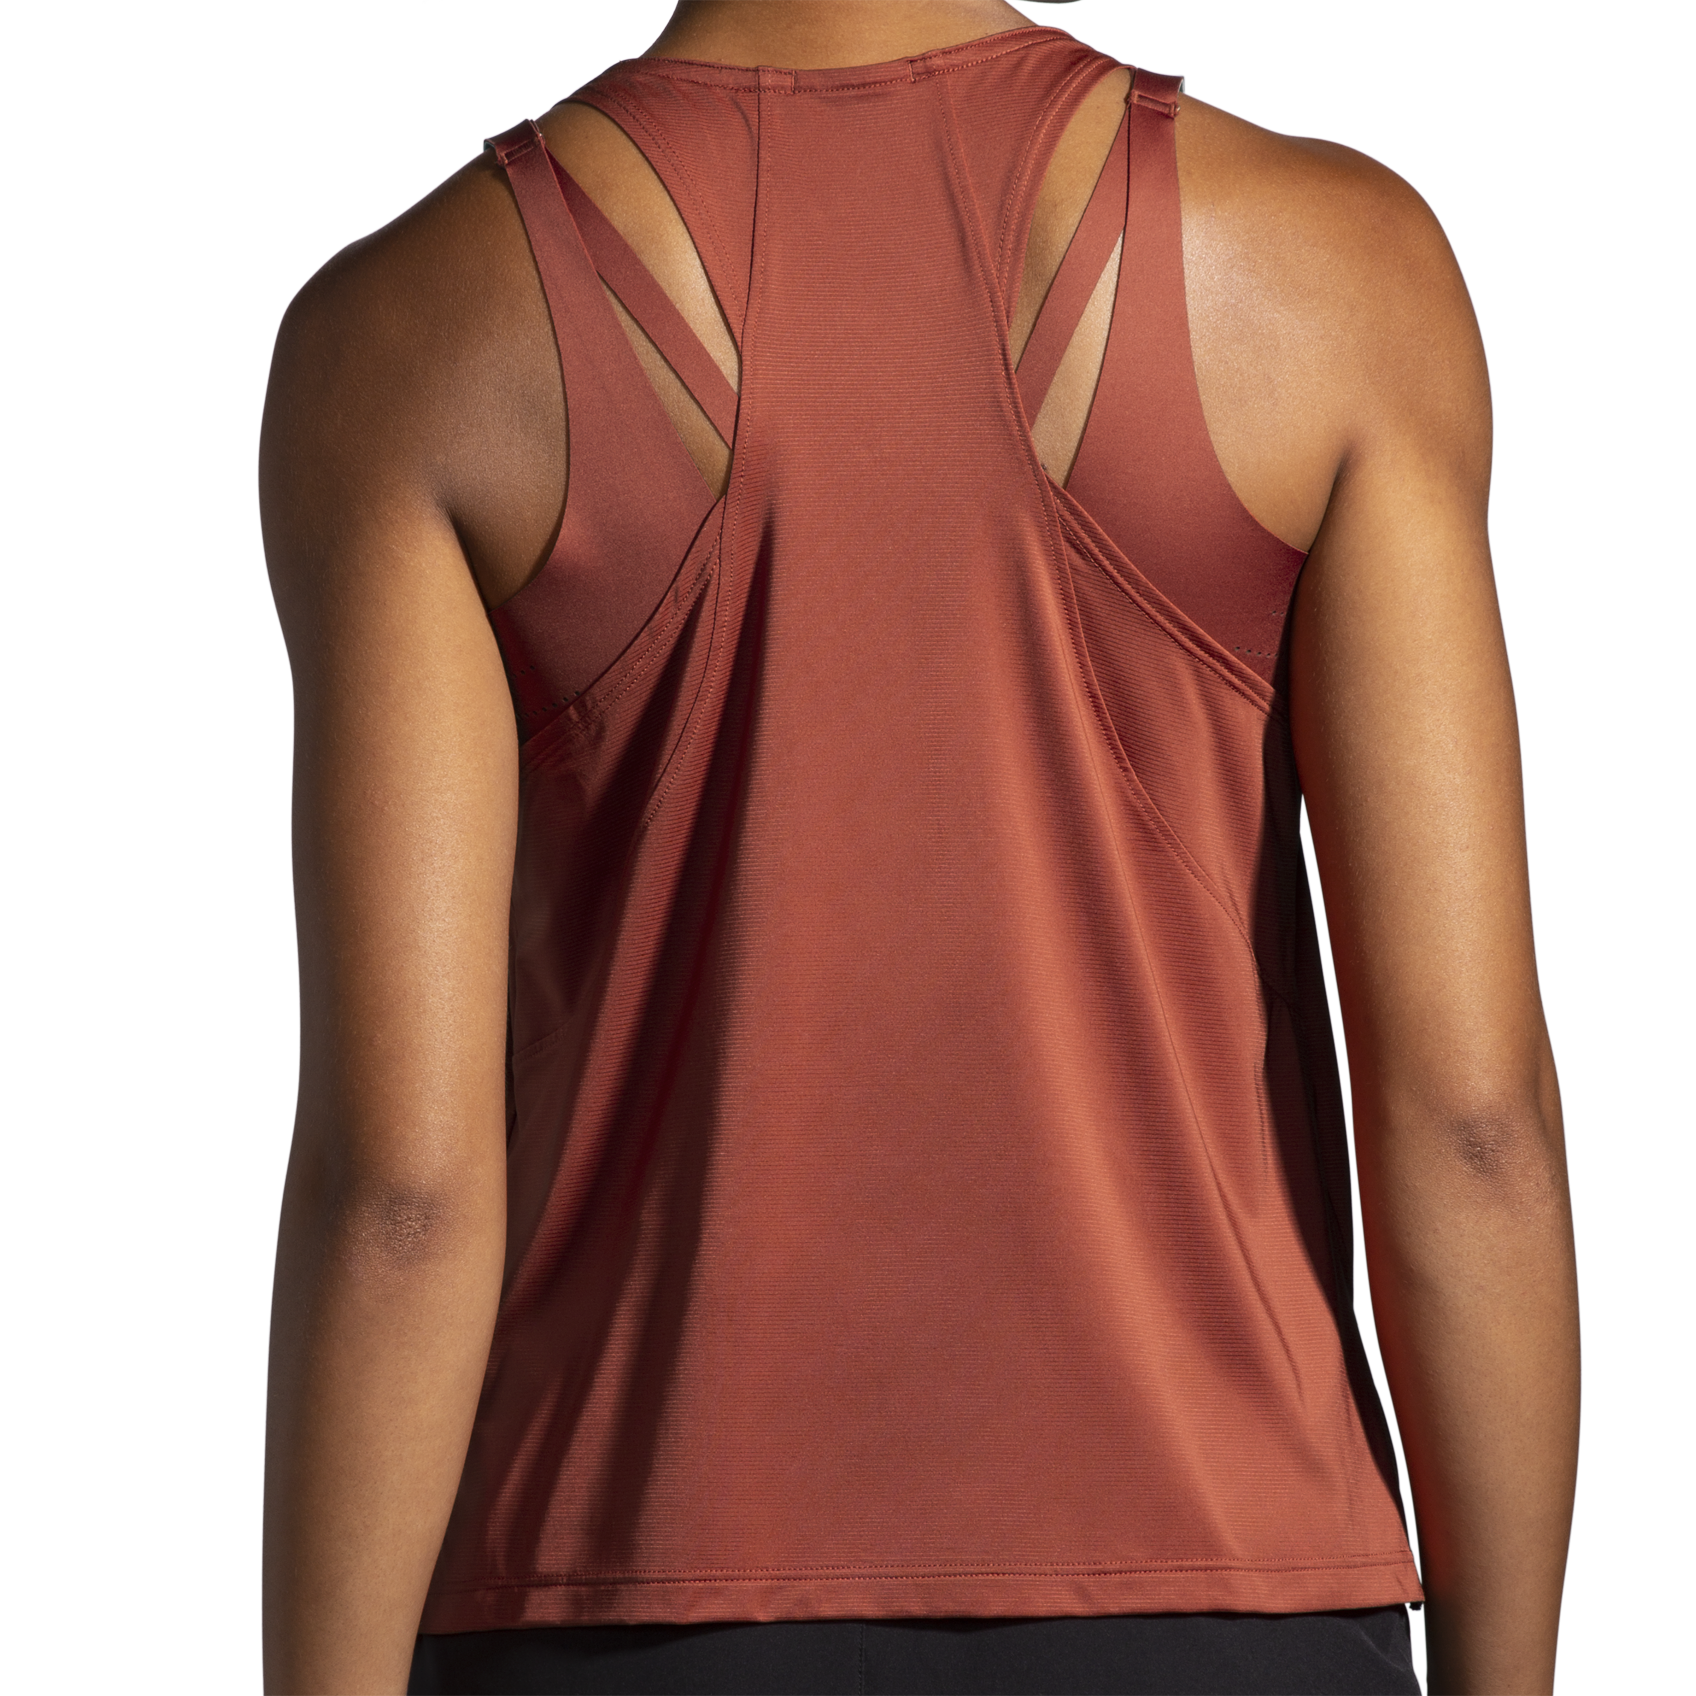 Brooks Sprint Womens Running Vest Red Breathable Lightweight Semi-Fitted Tank 